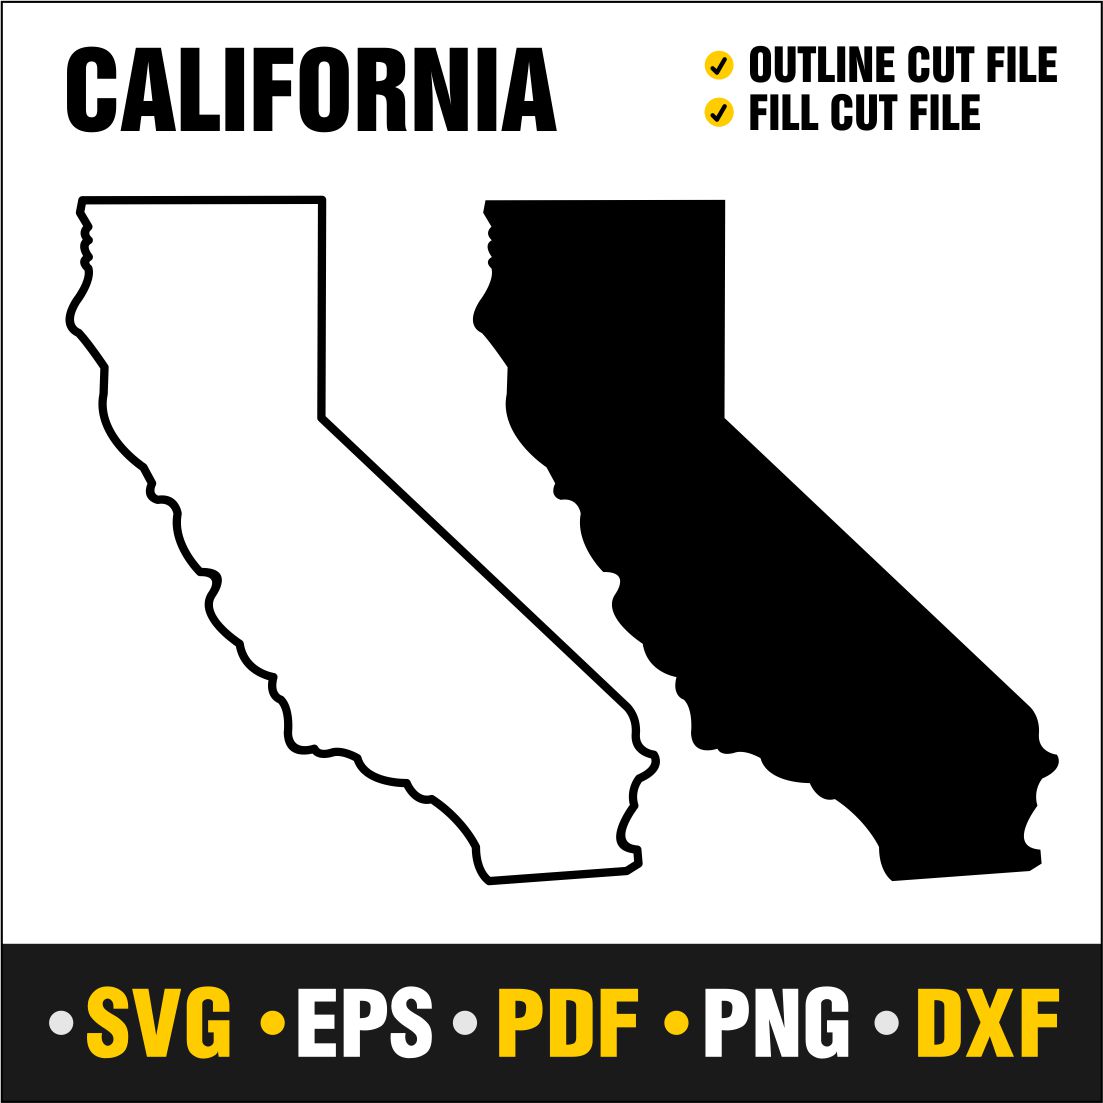 California SVG, PNG, PDF, EPS & DXF cover image.